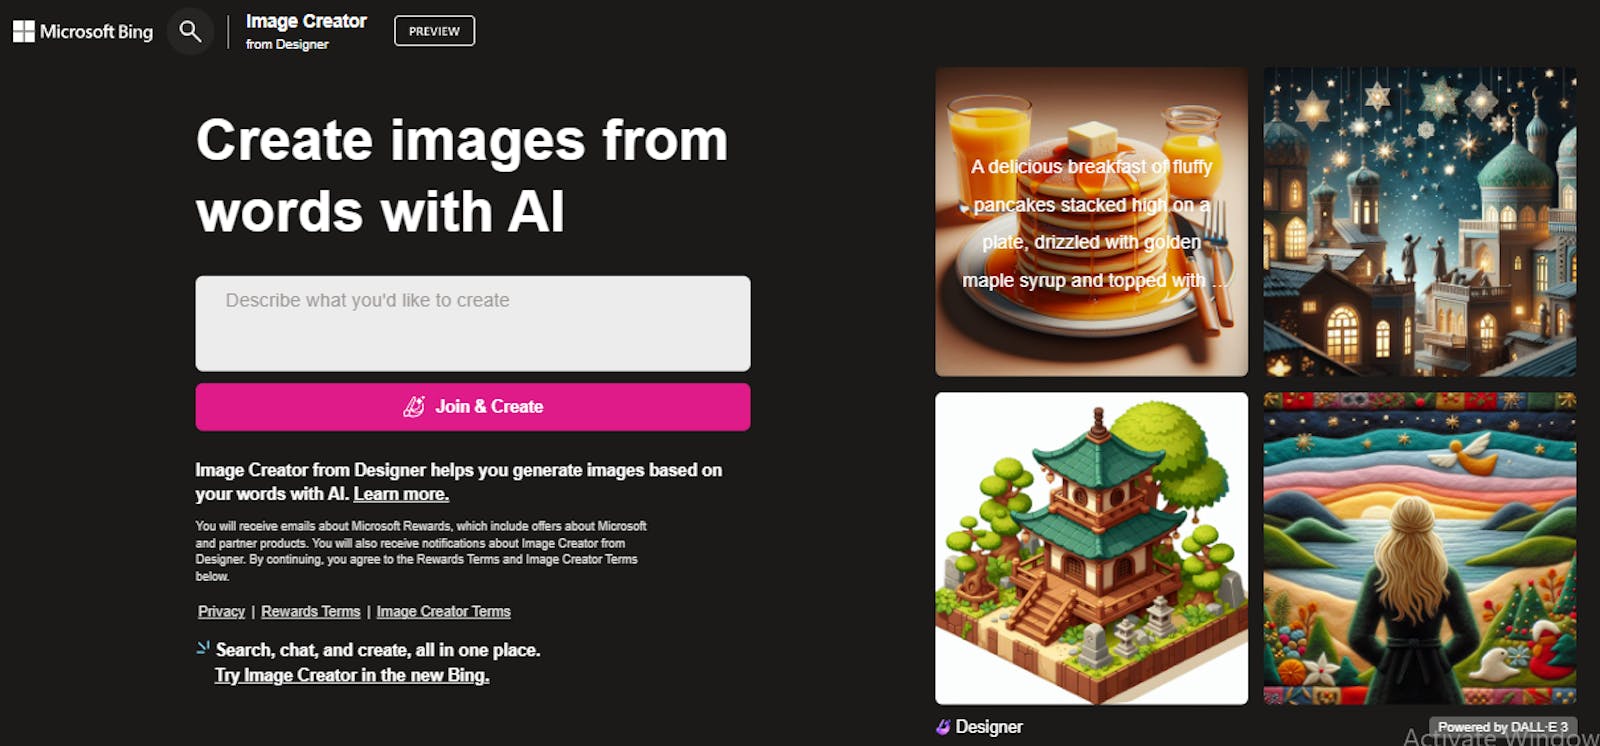 Unleash Your Imagination with Bing AI Image Creator